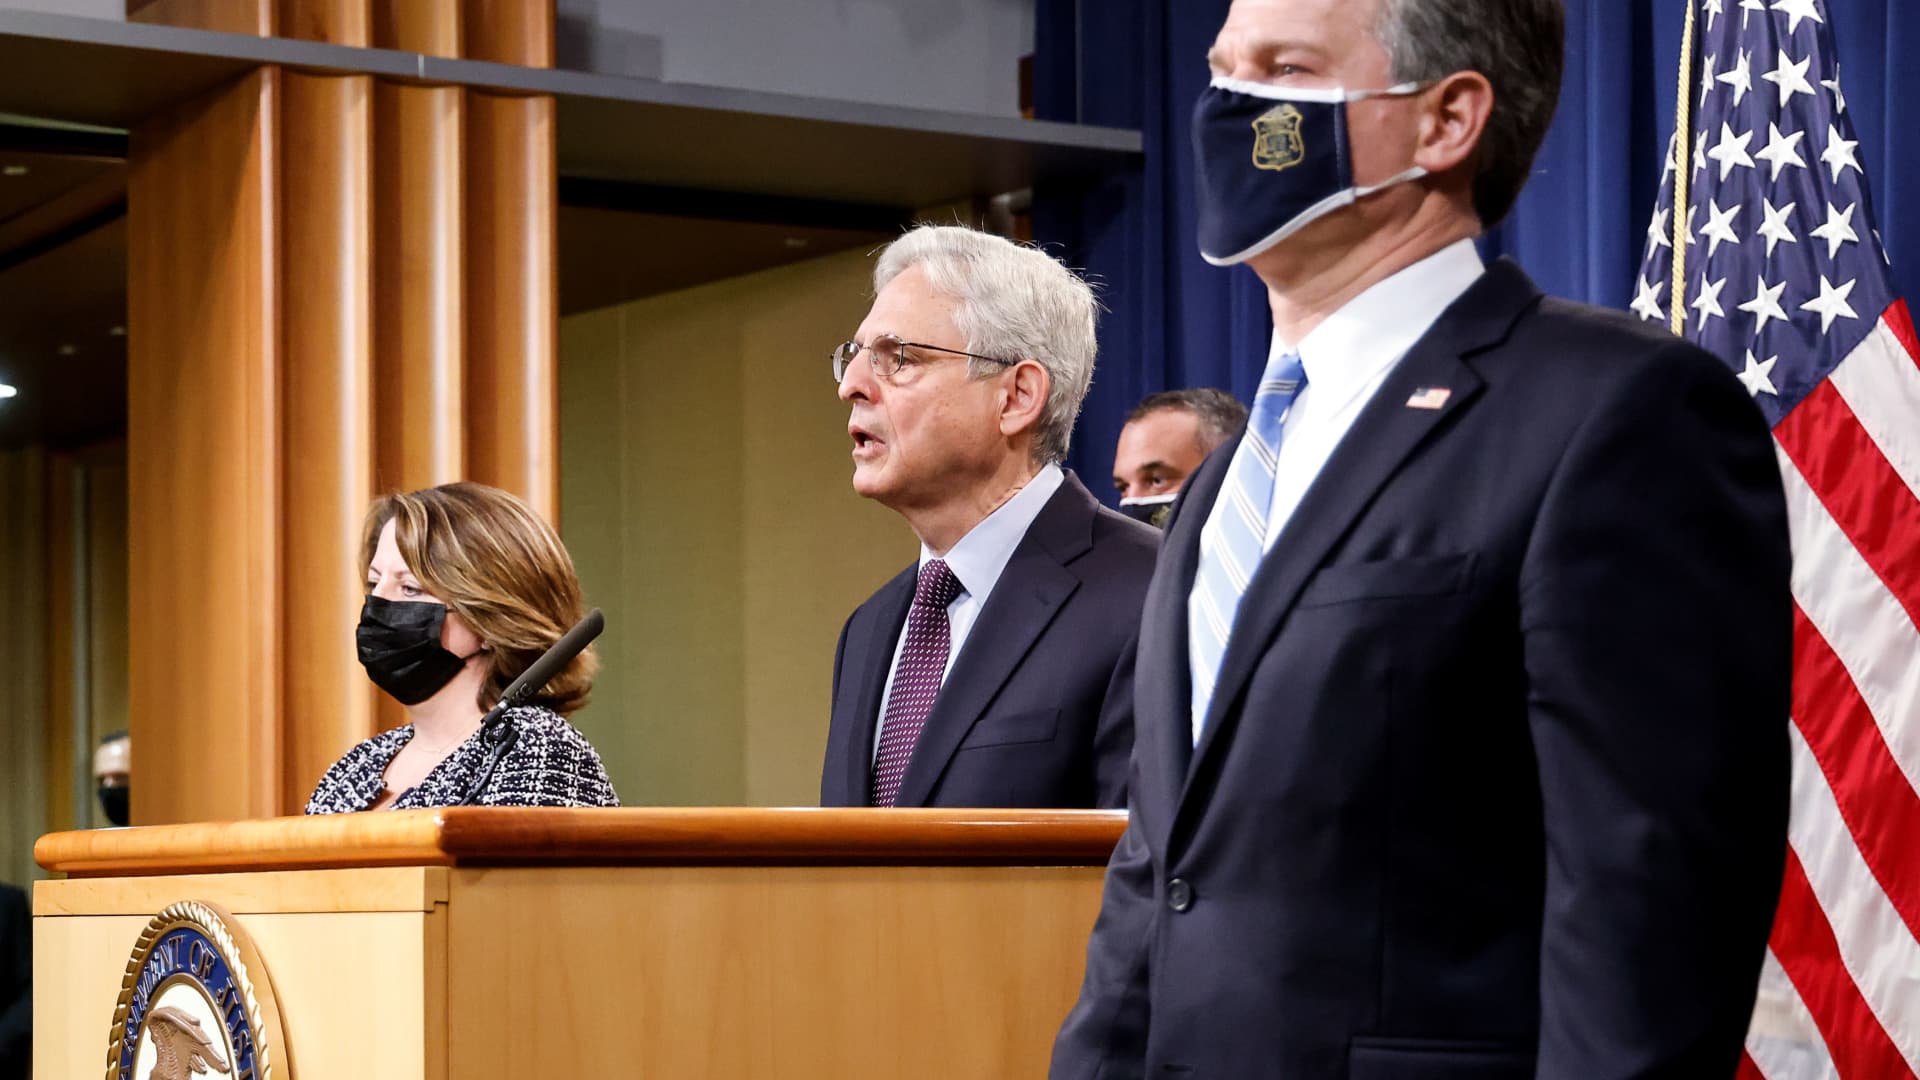 U.S. Attorney General Merrick Garland is flanked by Deputy Attorney General Lisa Monaco and FBI Director Christopher Wray as he announces charges against a suspect from Ukraine and a Russian national over a July ransomware attack on an American company, during a news conference at the Justice Department in Washington, November 8, 2021.